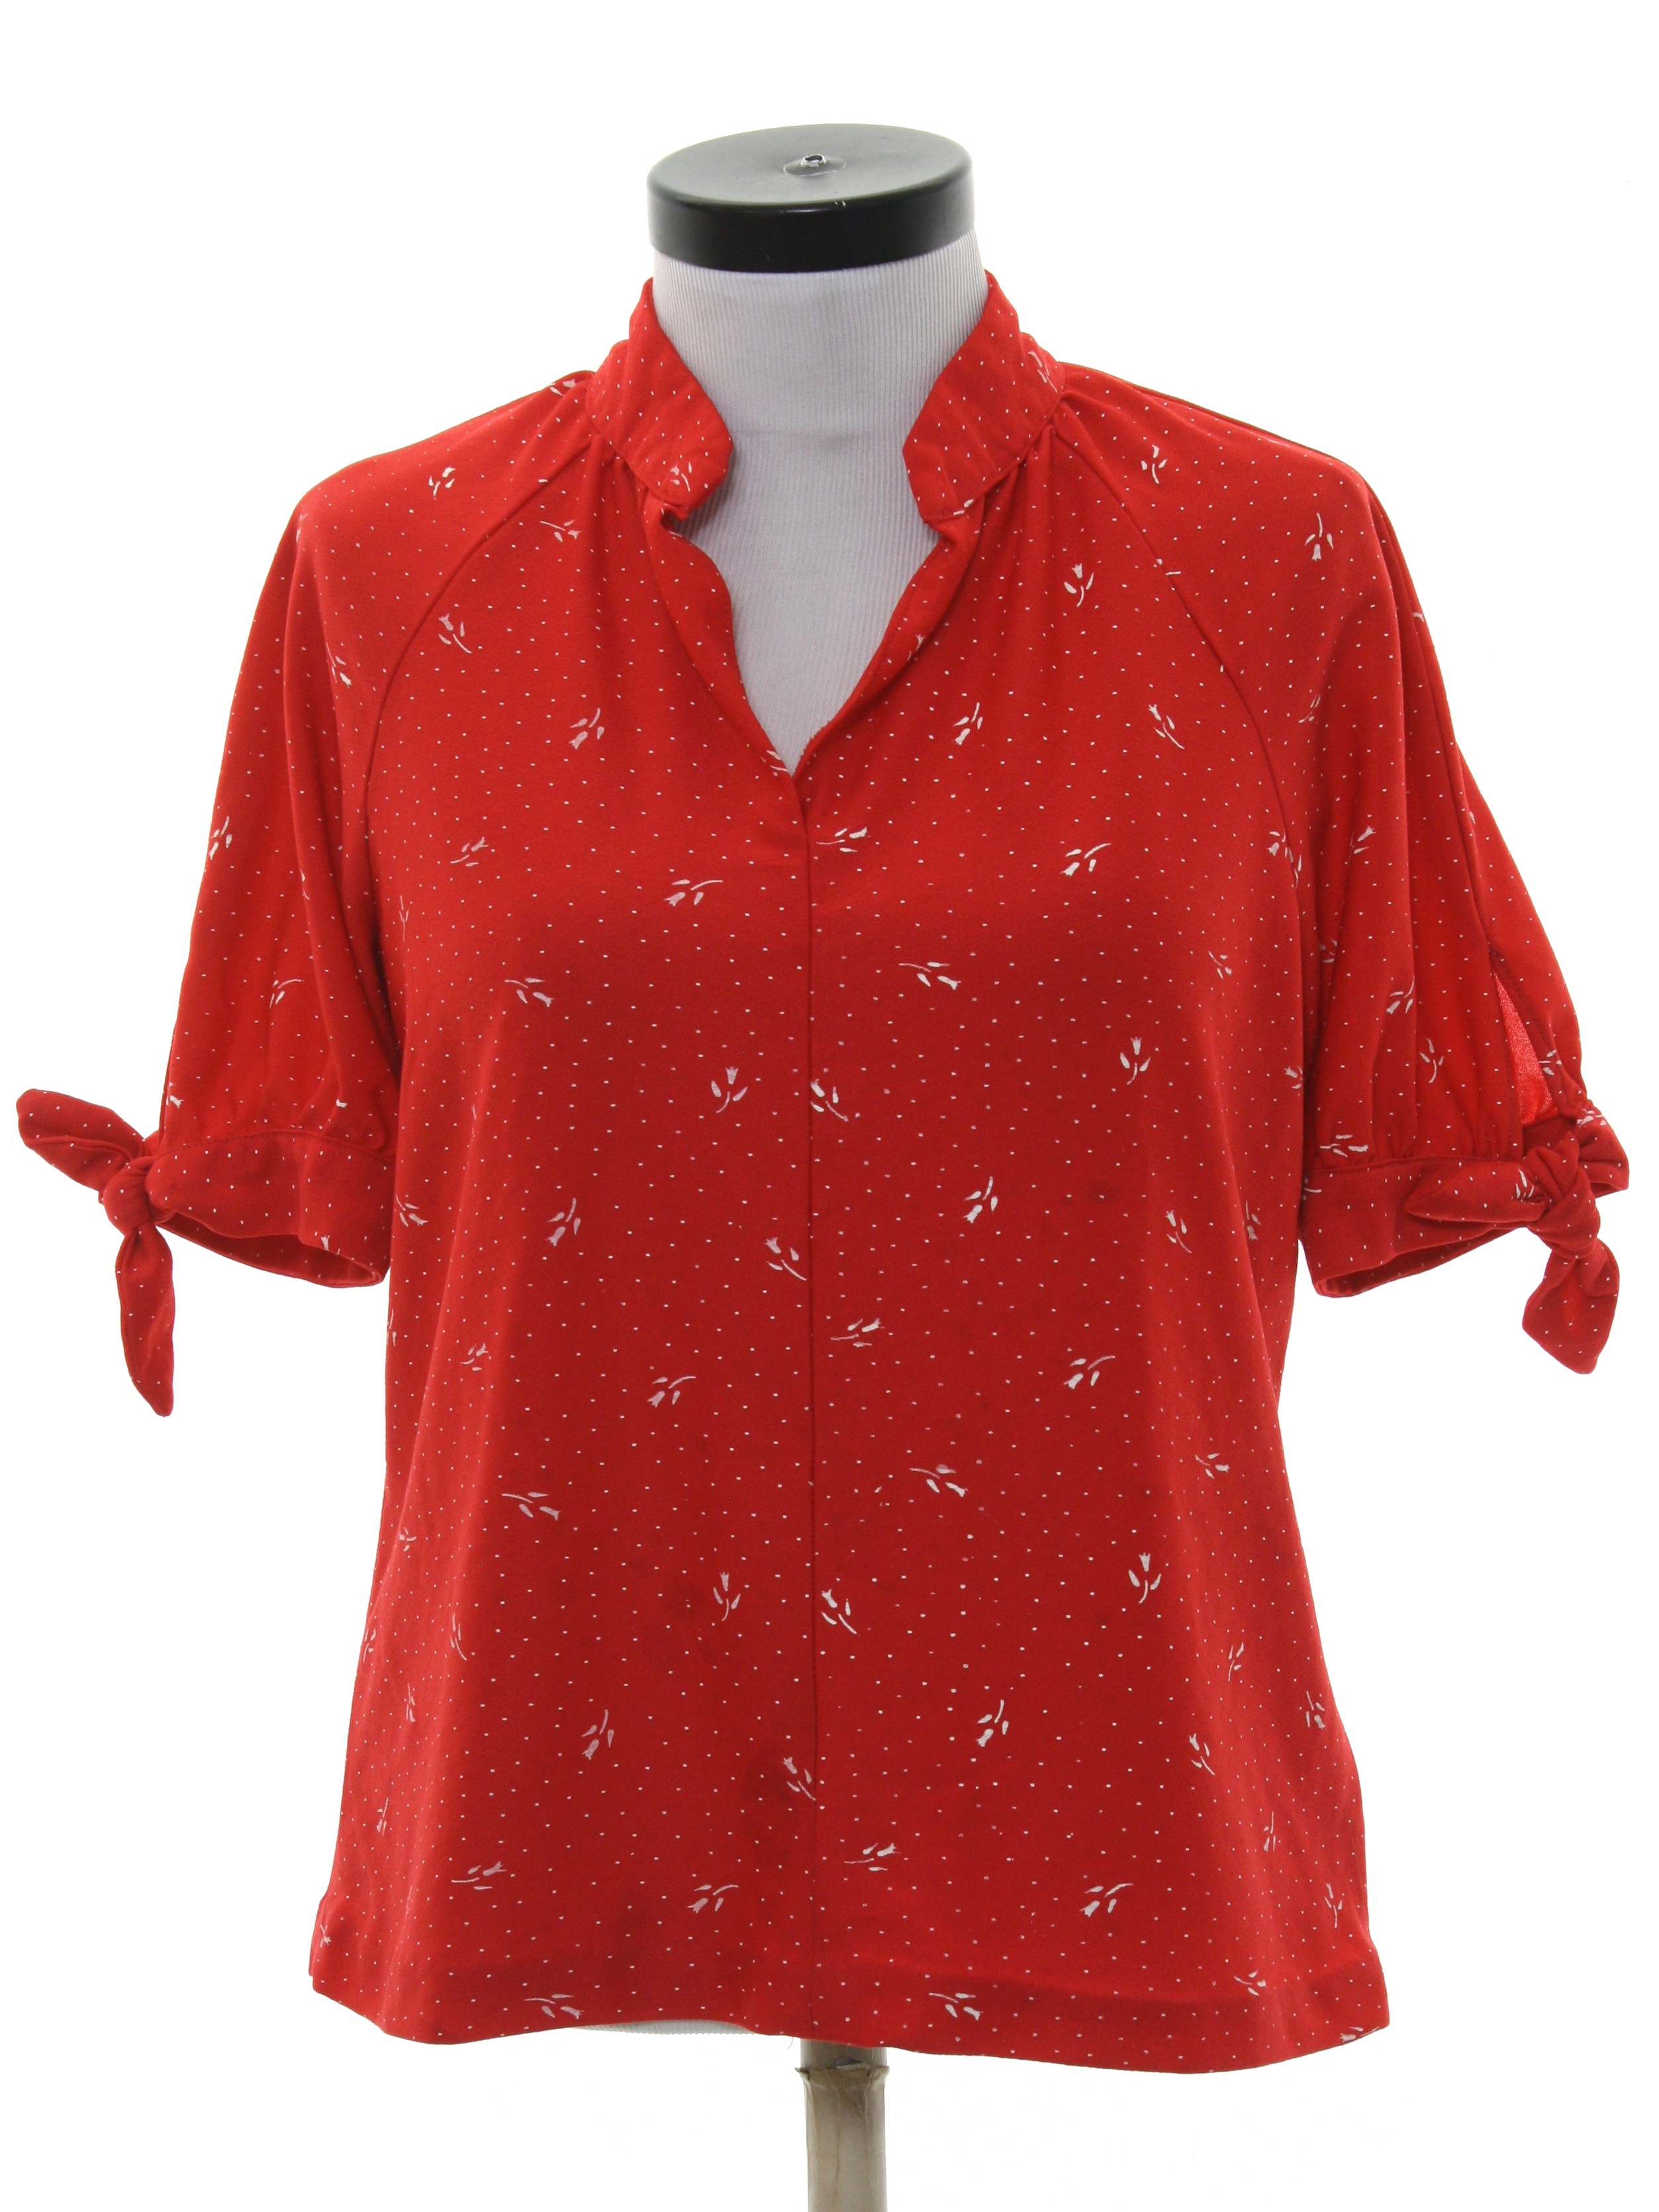 1970's Retro Shirt: Early 80s -No Label- Womens red and white polyester ...